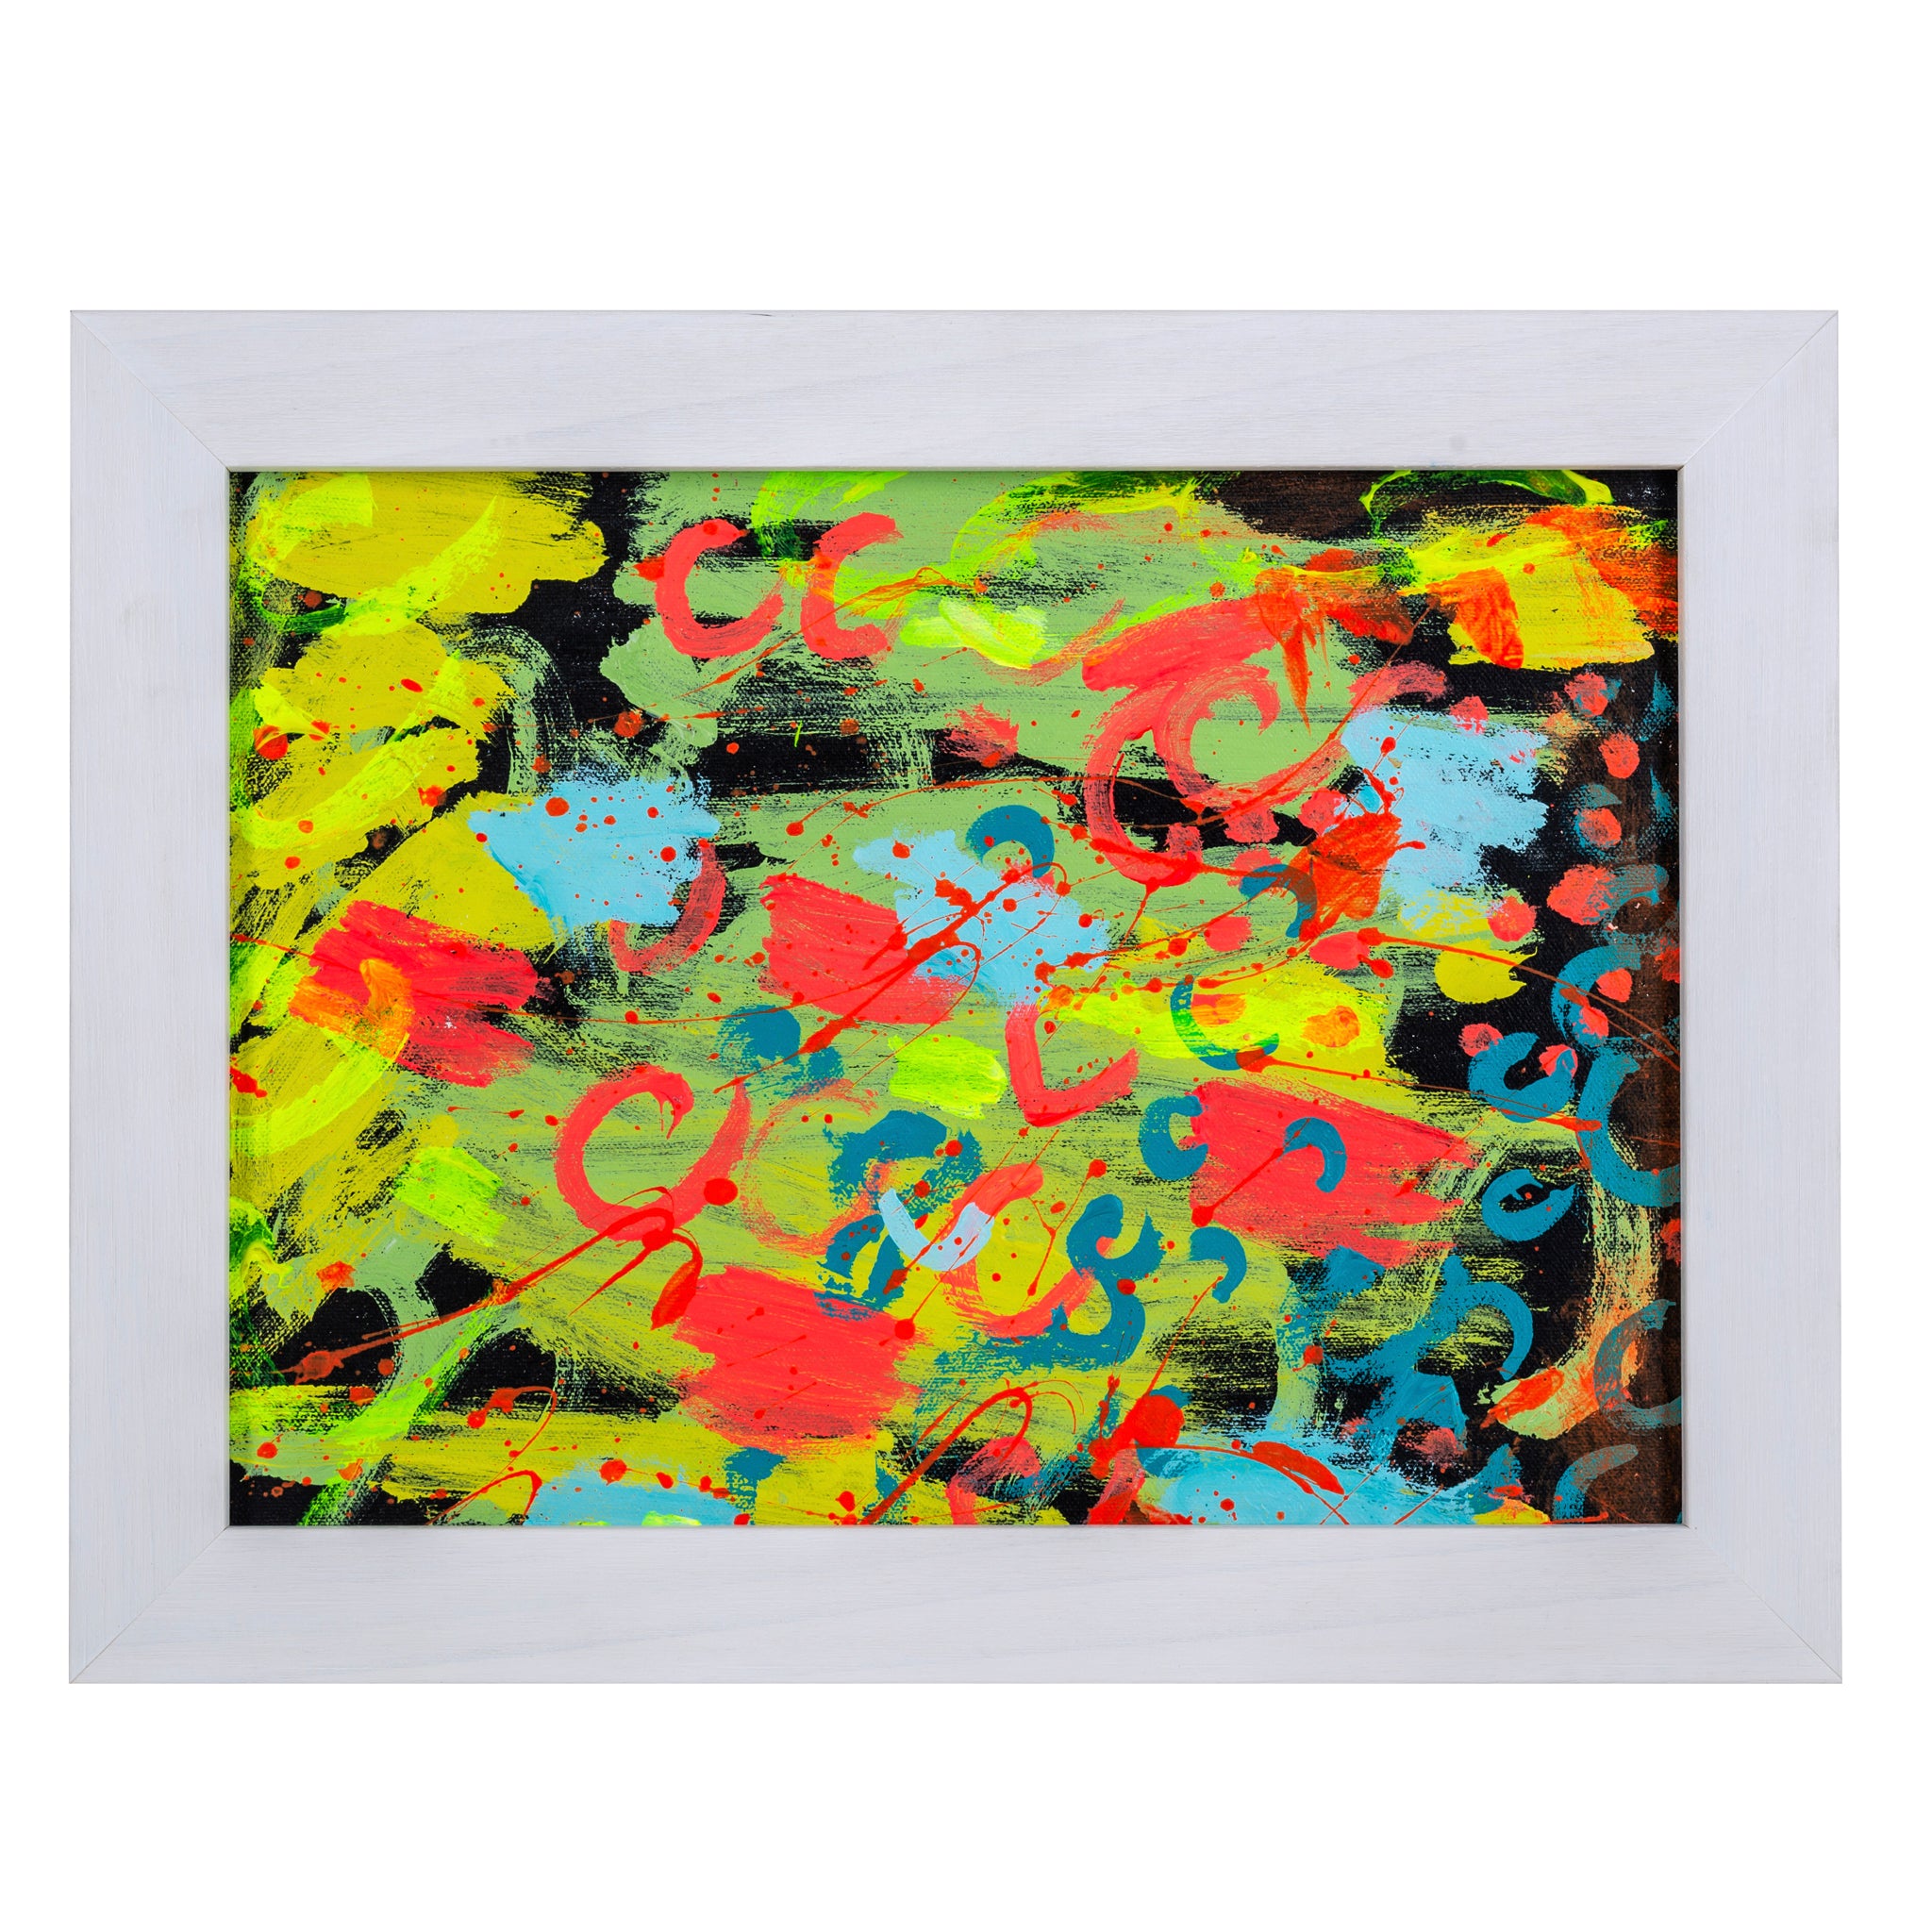 Framed abstract painting in black, orange, yellow and blues called Traffic Lights 1